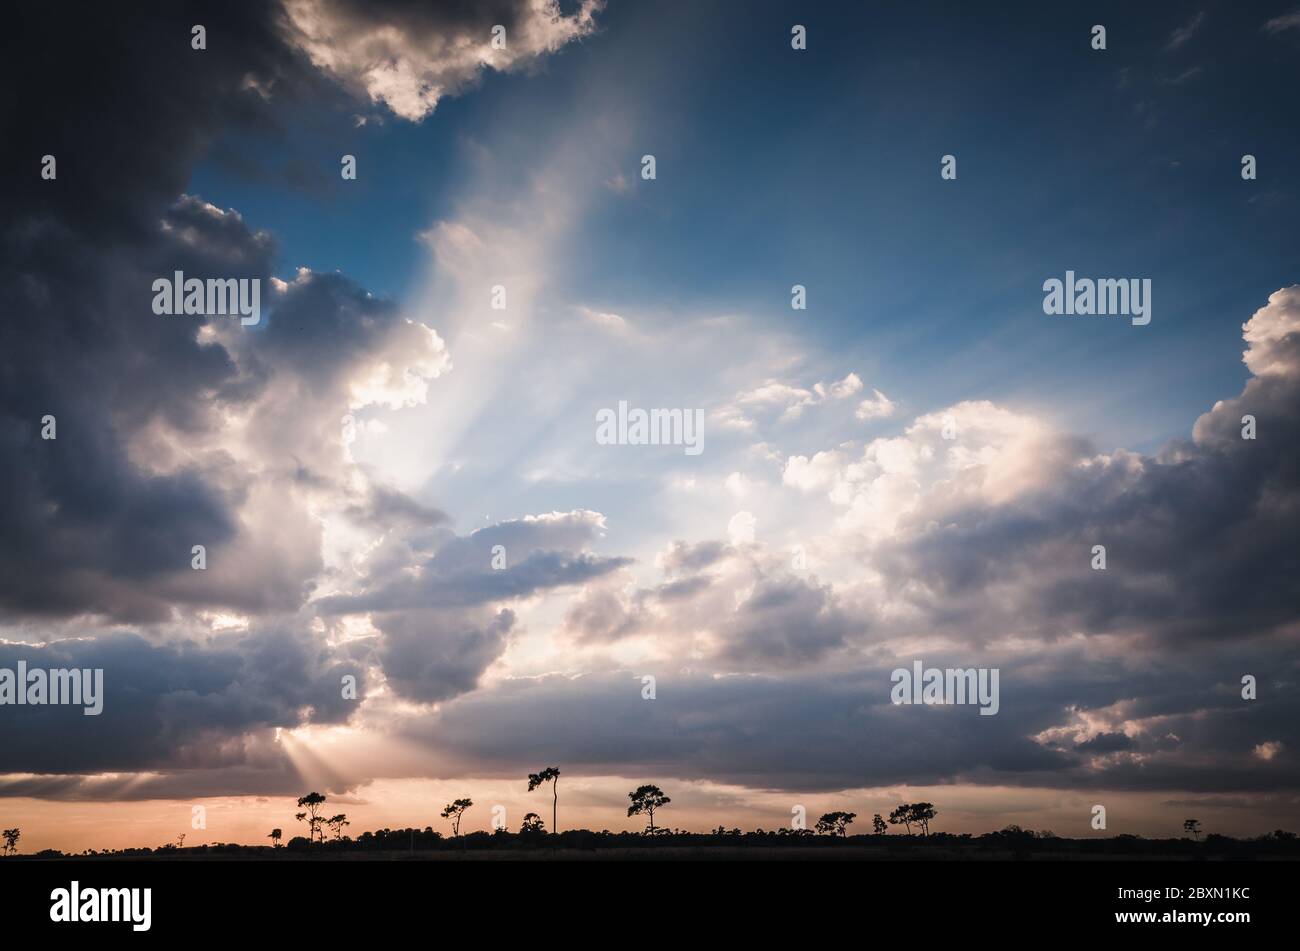 Florida prairie silhouetted against a heavenly sunset. Stock Photo